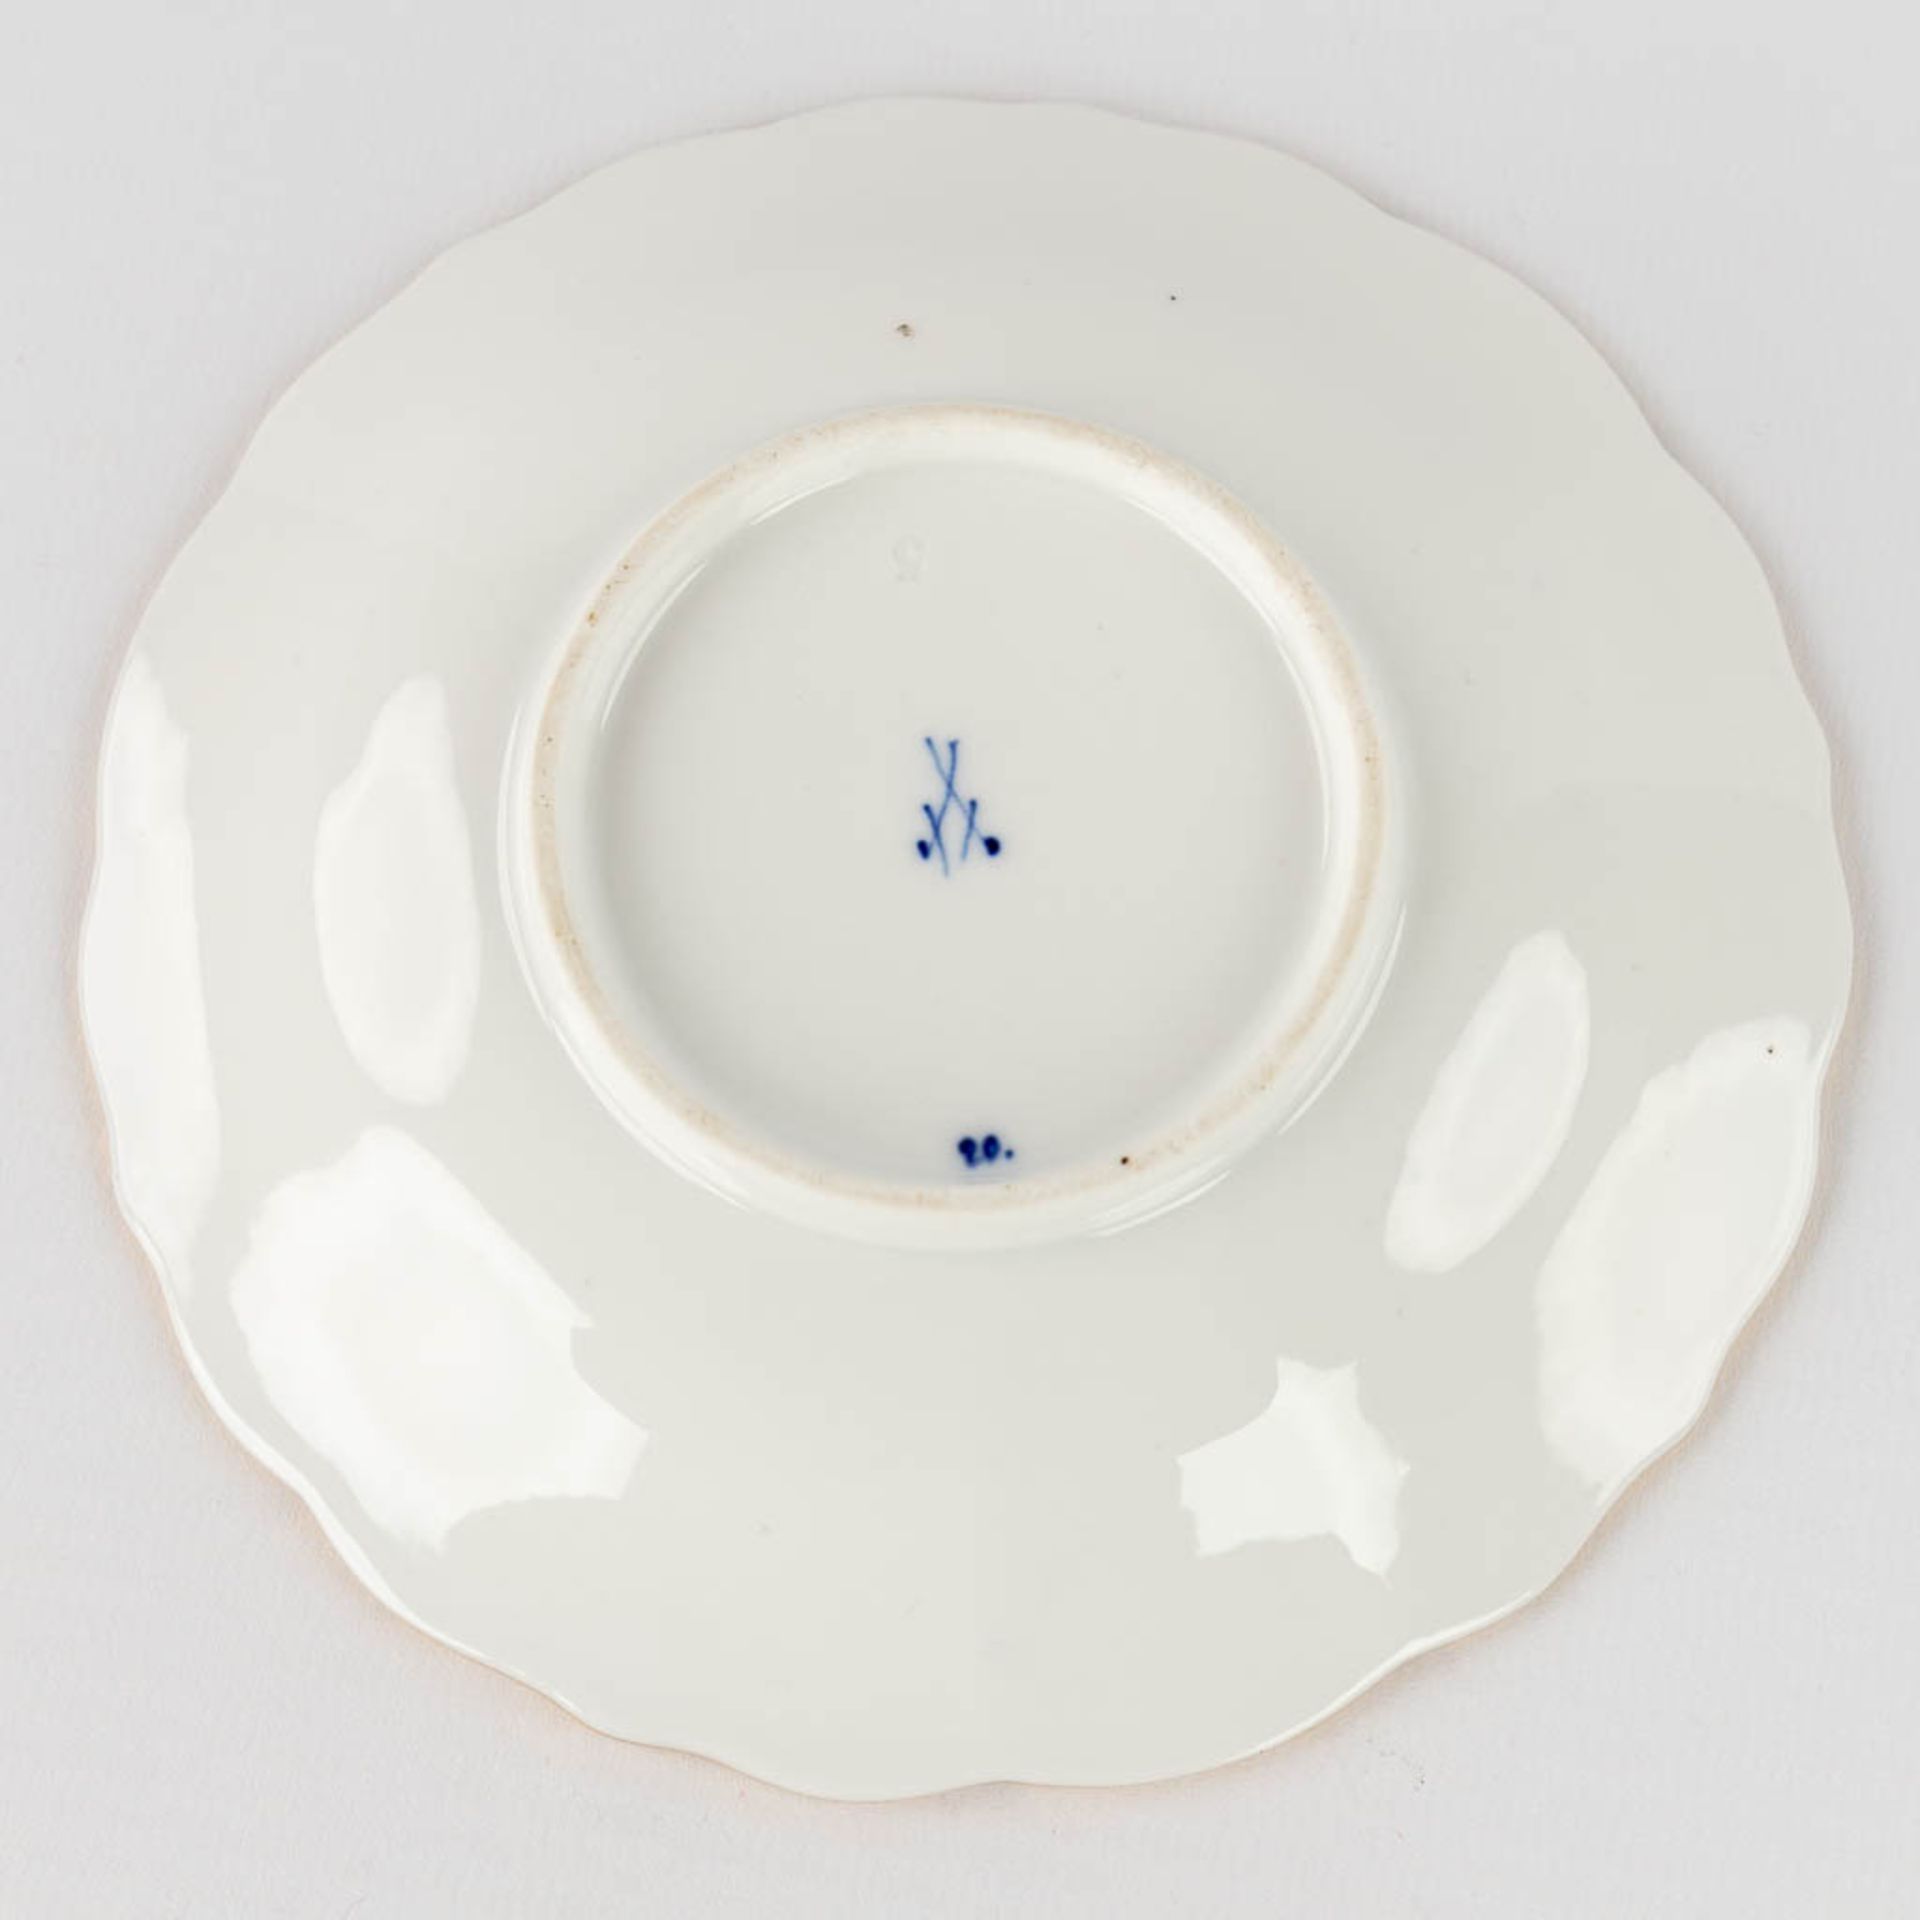 A large collection of porcelain items and table accessories of multiple marks. 19th and 20th C. (H:2 - Image 33 of 36